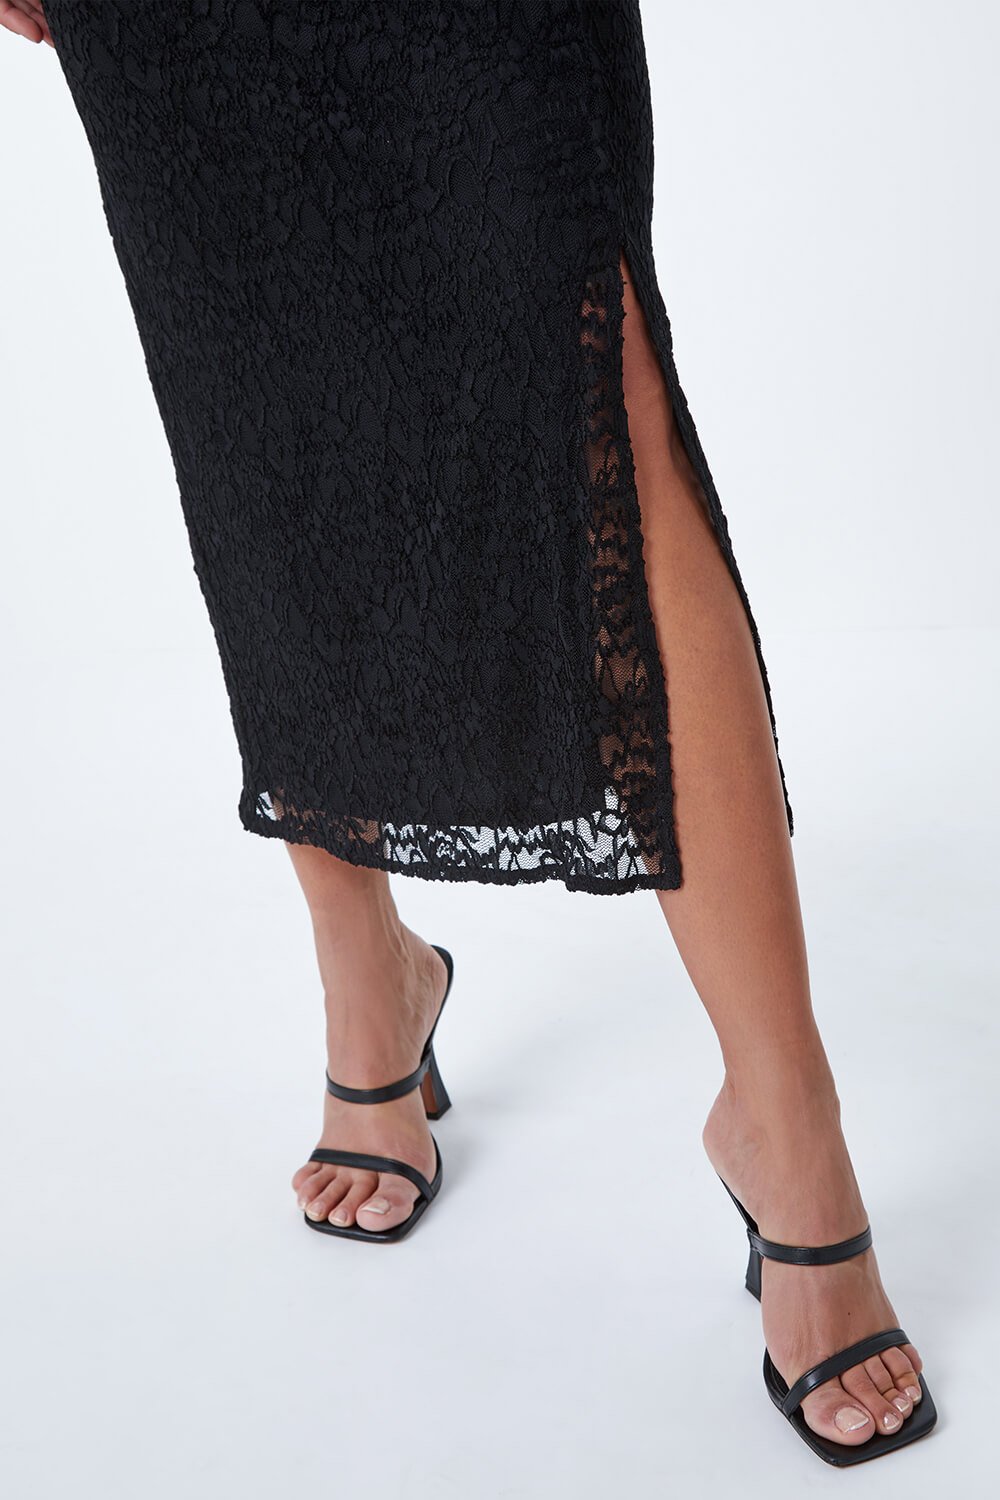 Black Ruched Waist Lace Maxi Dress, Image 5 of 5